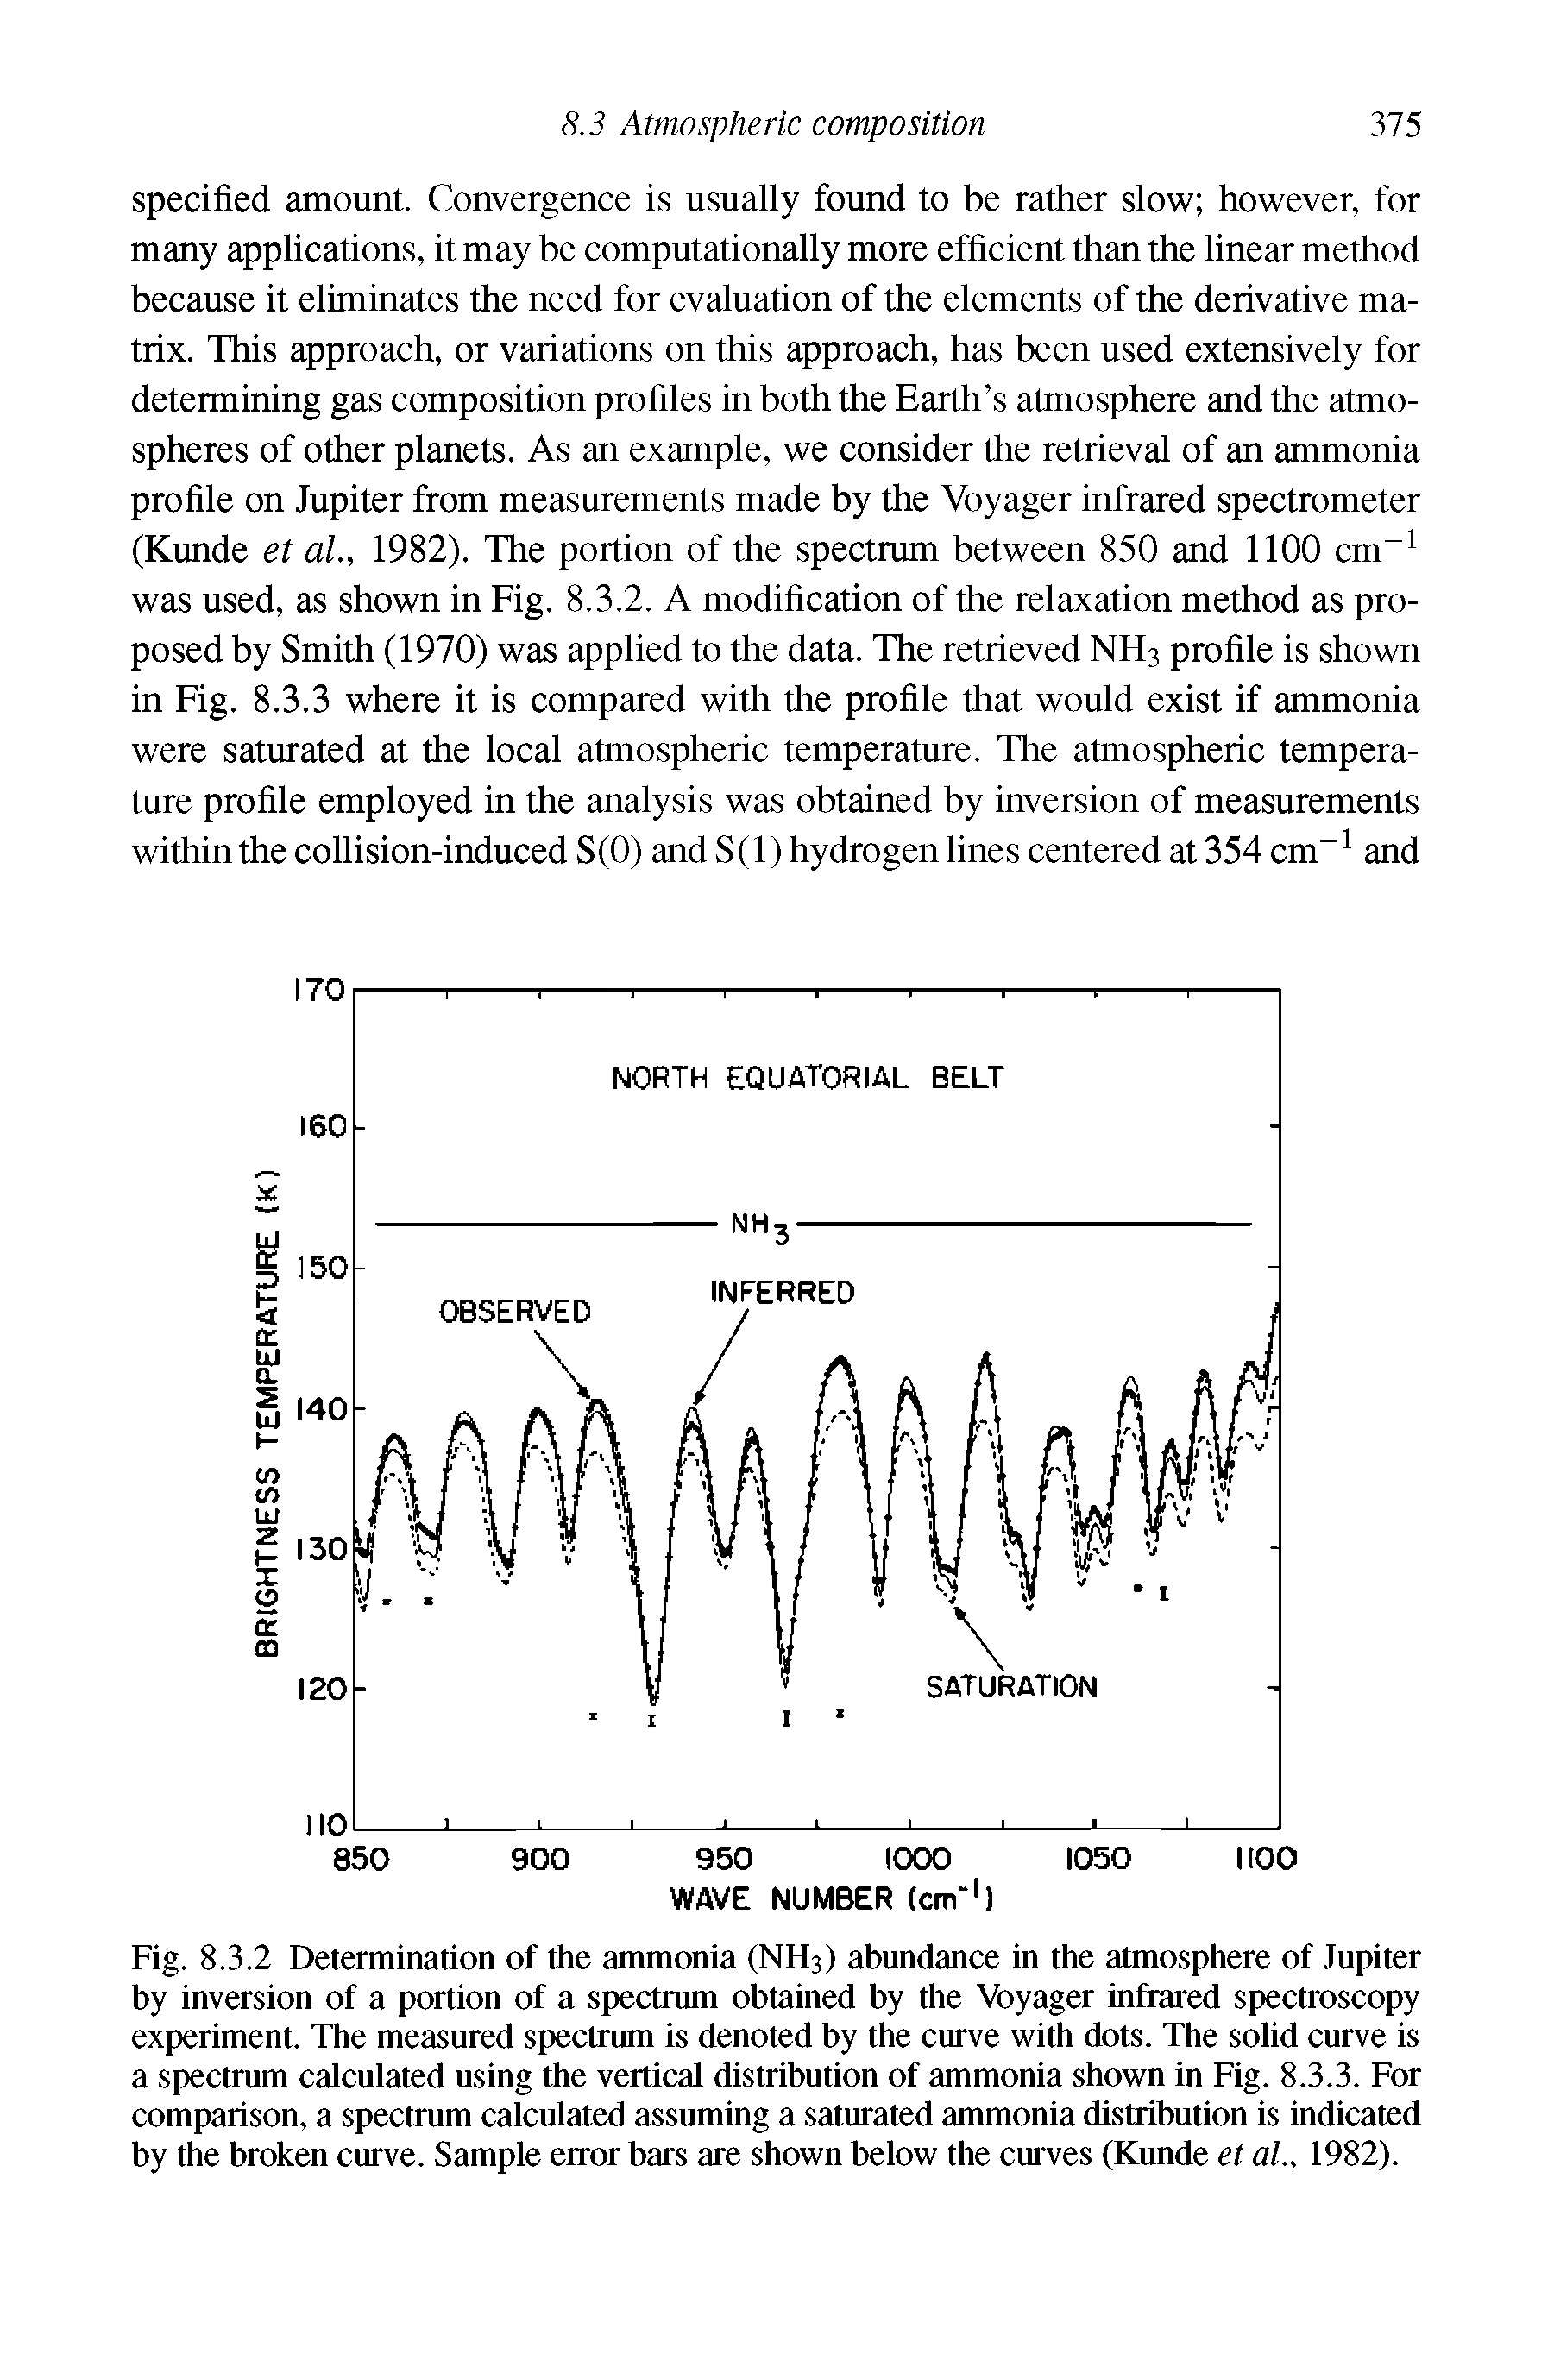 Fig. 8.3.2 Determination of the ammonia (NH3) abundance in the atmosphere of Jupiter by inversion of a portion of a spectrum obtained by the Voyager infrar spectroscopy experiment. The measured spectrum is denoted by the curve with dots. The solid curve is a spectrum calculated using the vertical distribution of ammonia shown in Fig. 8.3.3. For comparison, a spectrum calculated assuming a saturated ammonia distribution is indicated by the broken curve. Sample error bars are shown below the curves (Kunde et al., 1982).